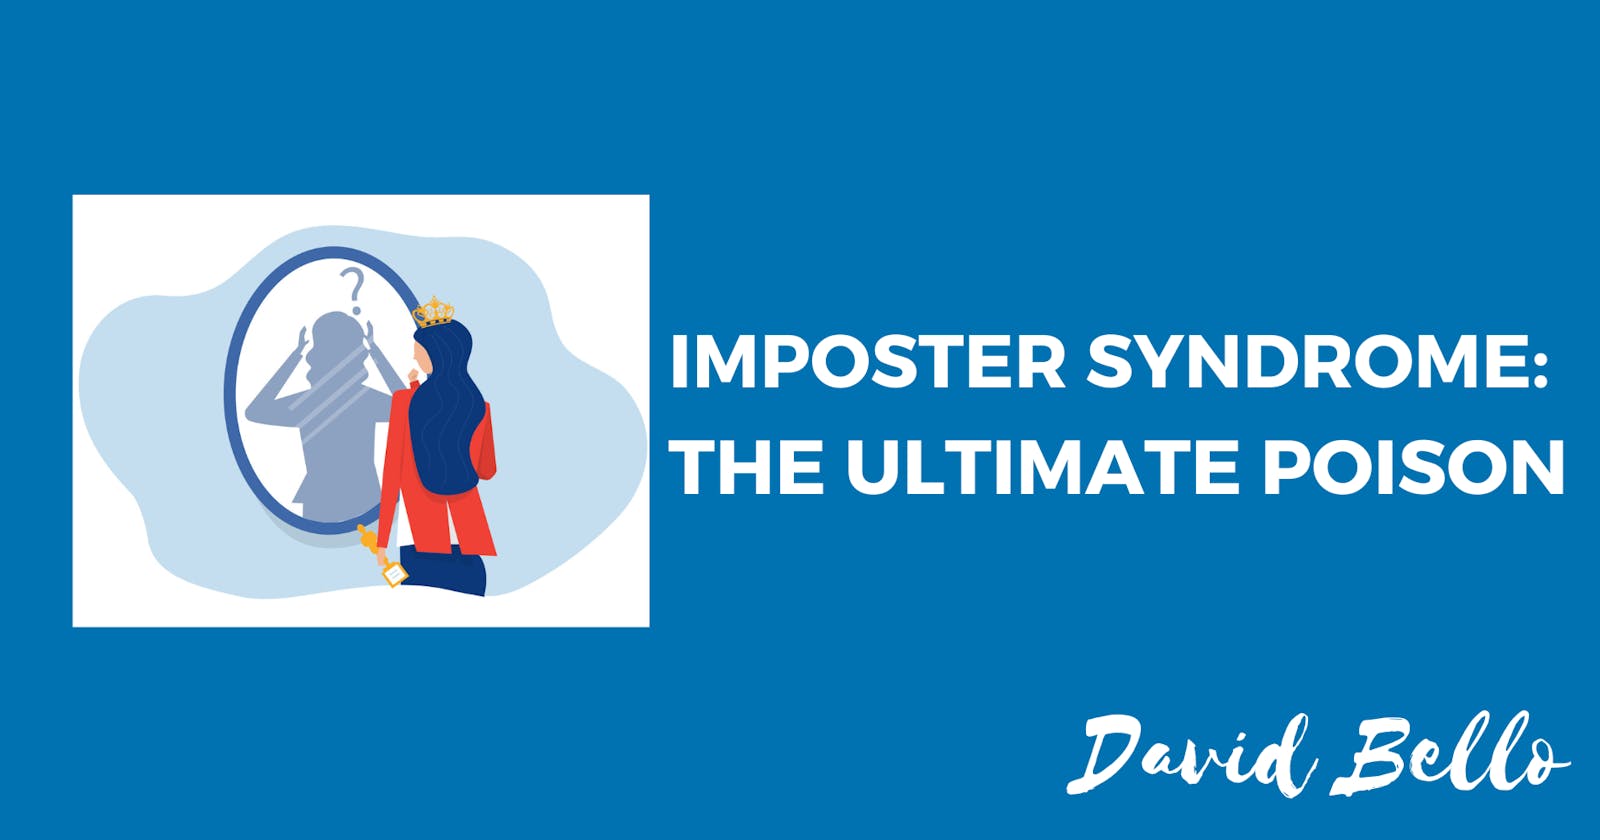 Inposter syndrome: The ultimate poison